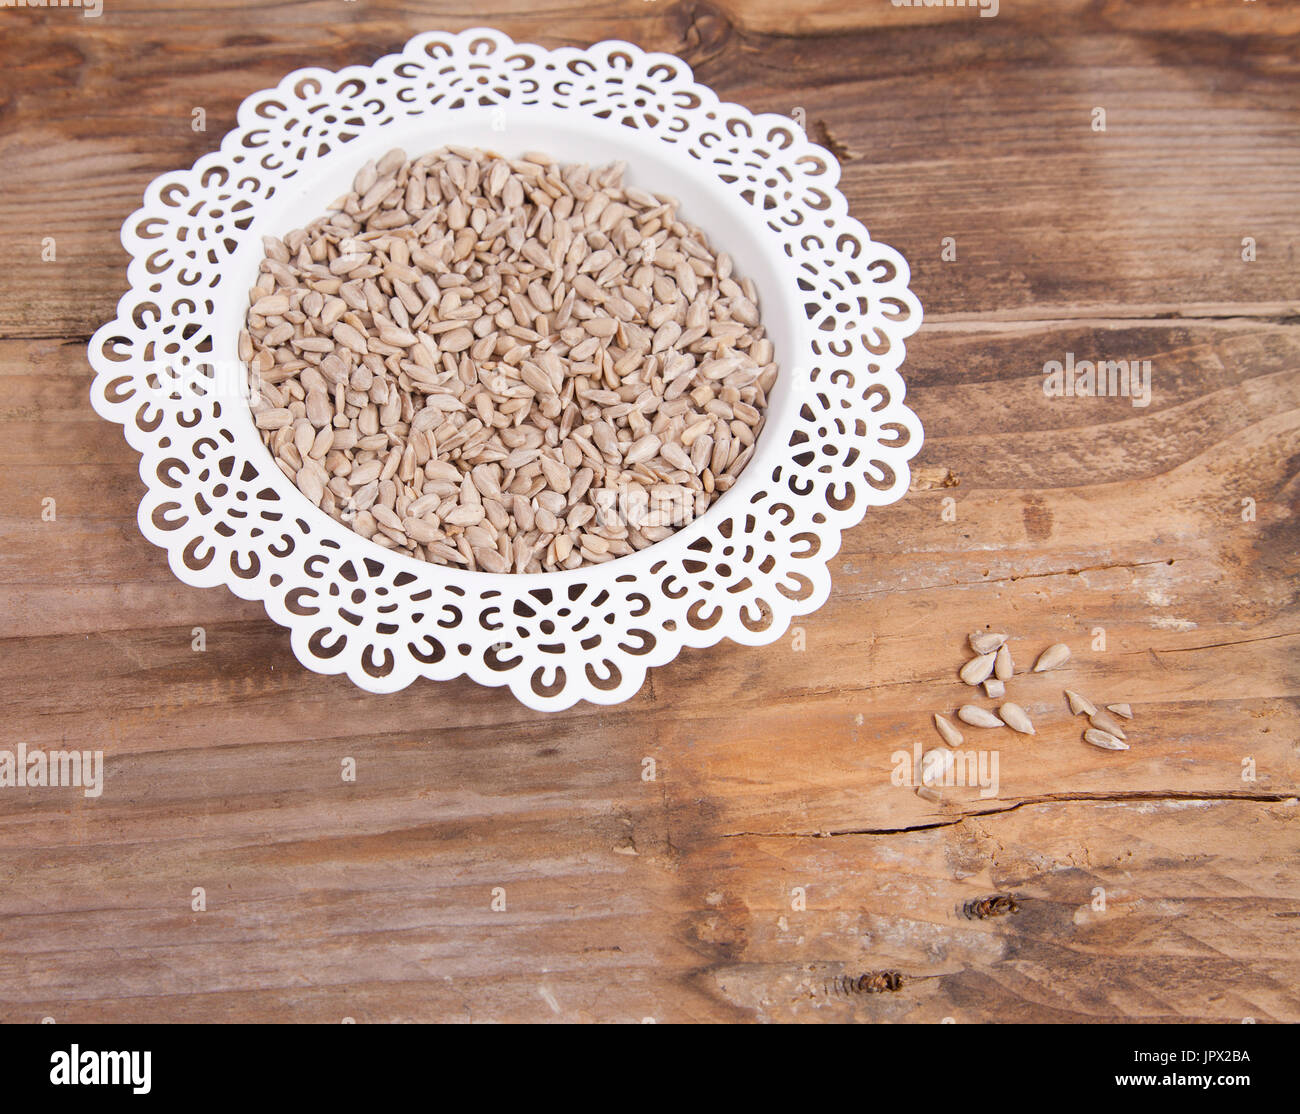 Sunflower seeds in white bowl on wooden background Stock Photo